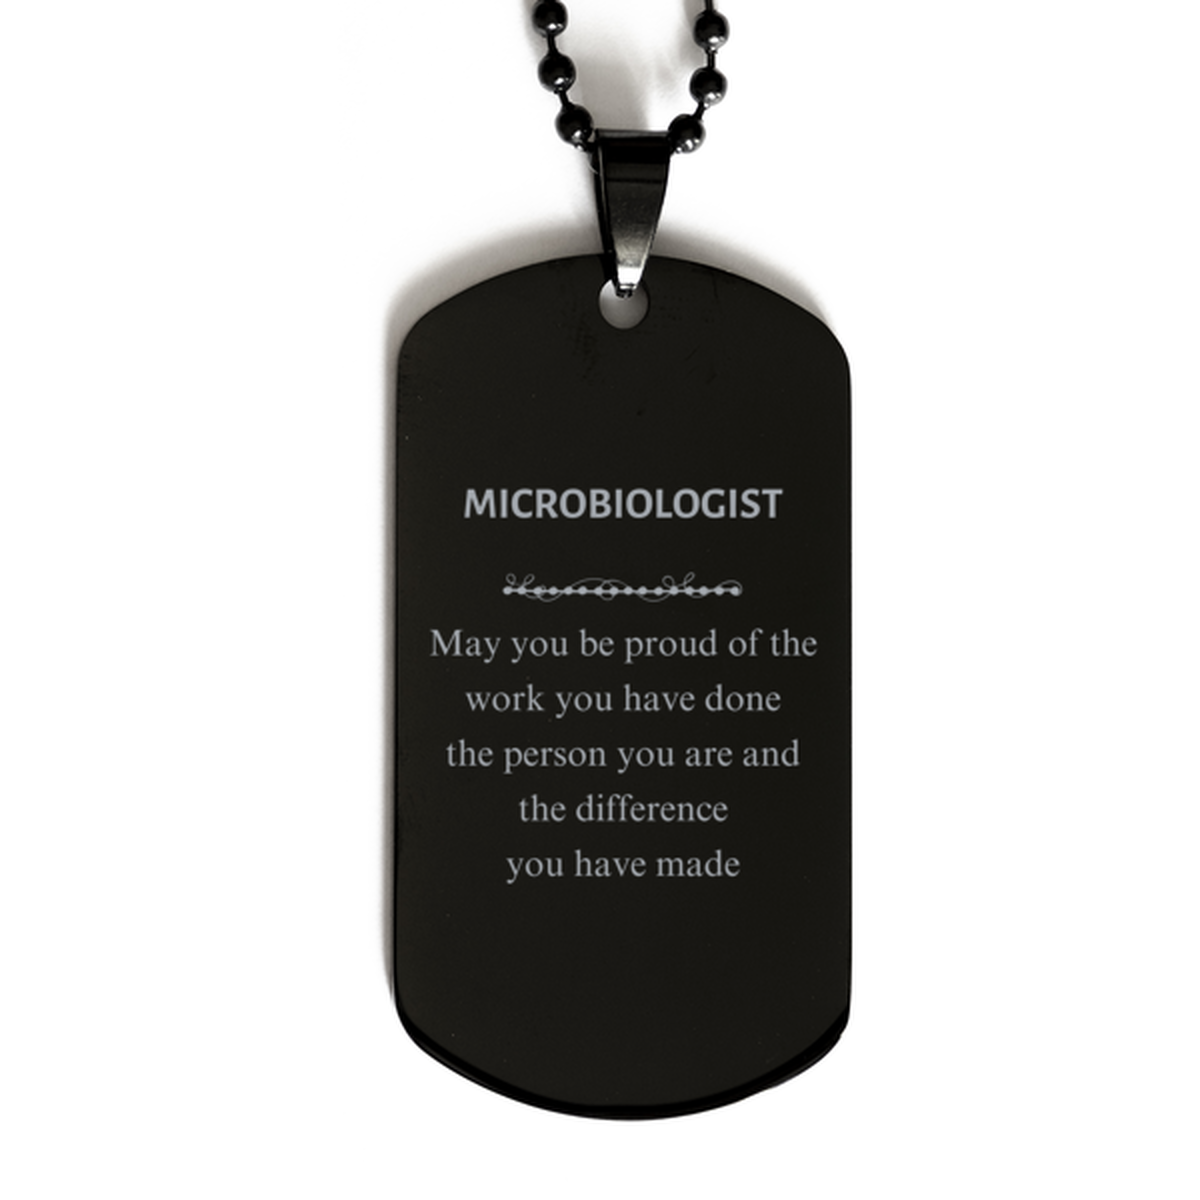 Microbiologist May you be proud of the work you have done, Retirement Microbiologist Black Dog Tag for Colleague Appreciation Gifts Amazing for Microbiologist